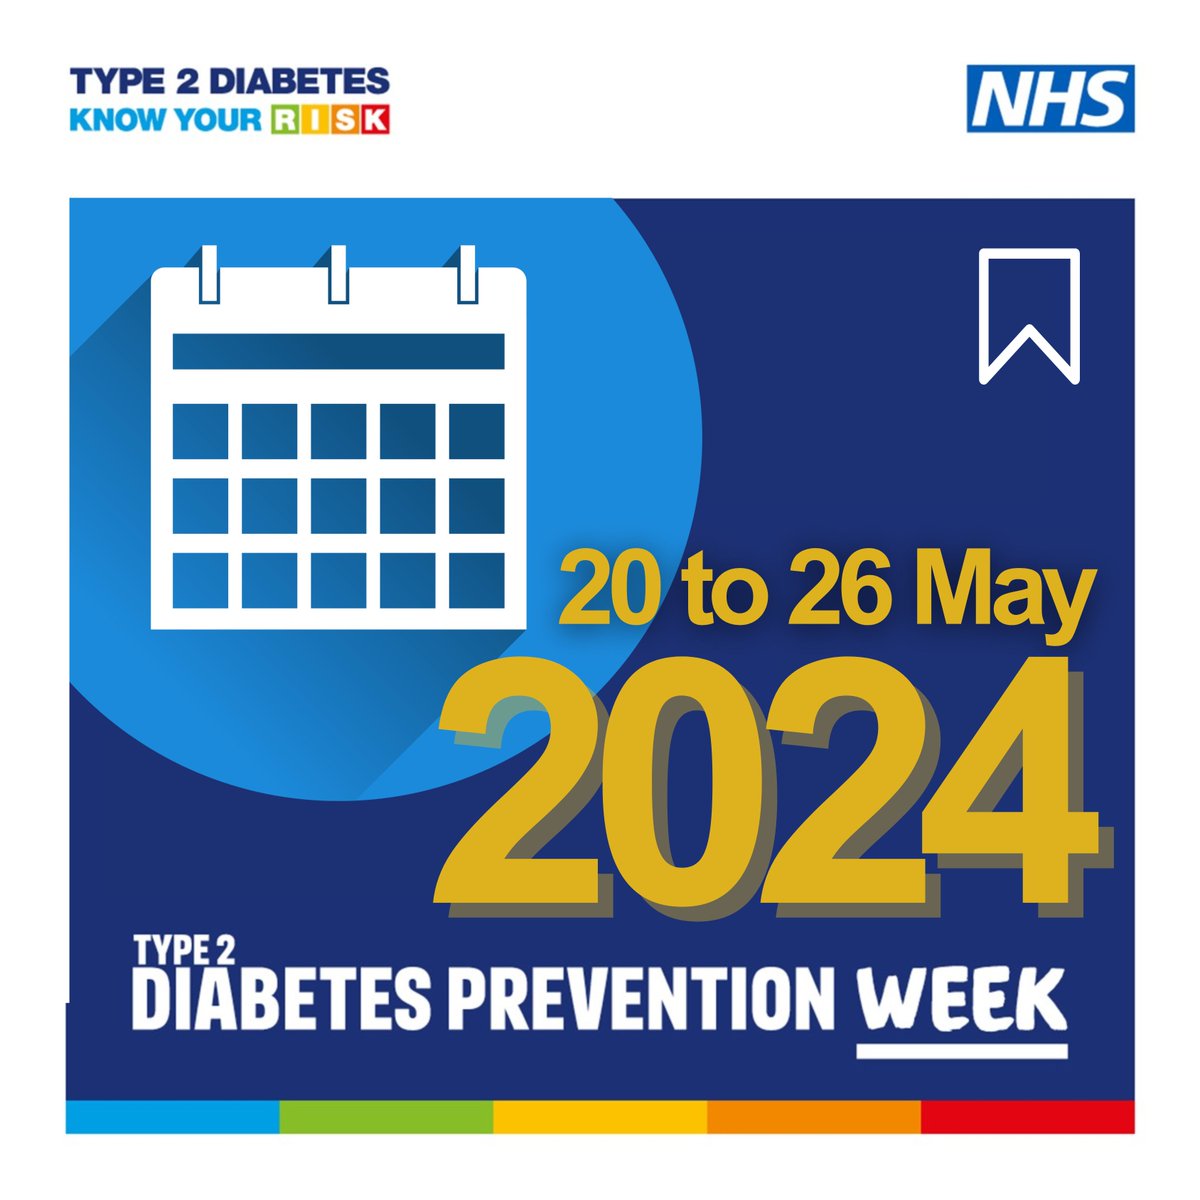 📢 SAVE THE DATE: This year, Type 2 Diabetes Prevention Week will take place from 20 to 26 May 2024. A toolkit will be available to download nearer the time to help you mark this important week. Stay tuned! 😎